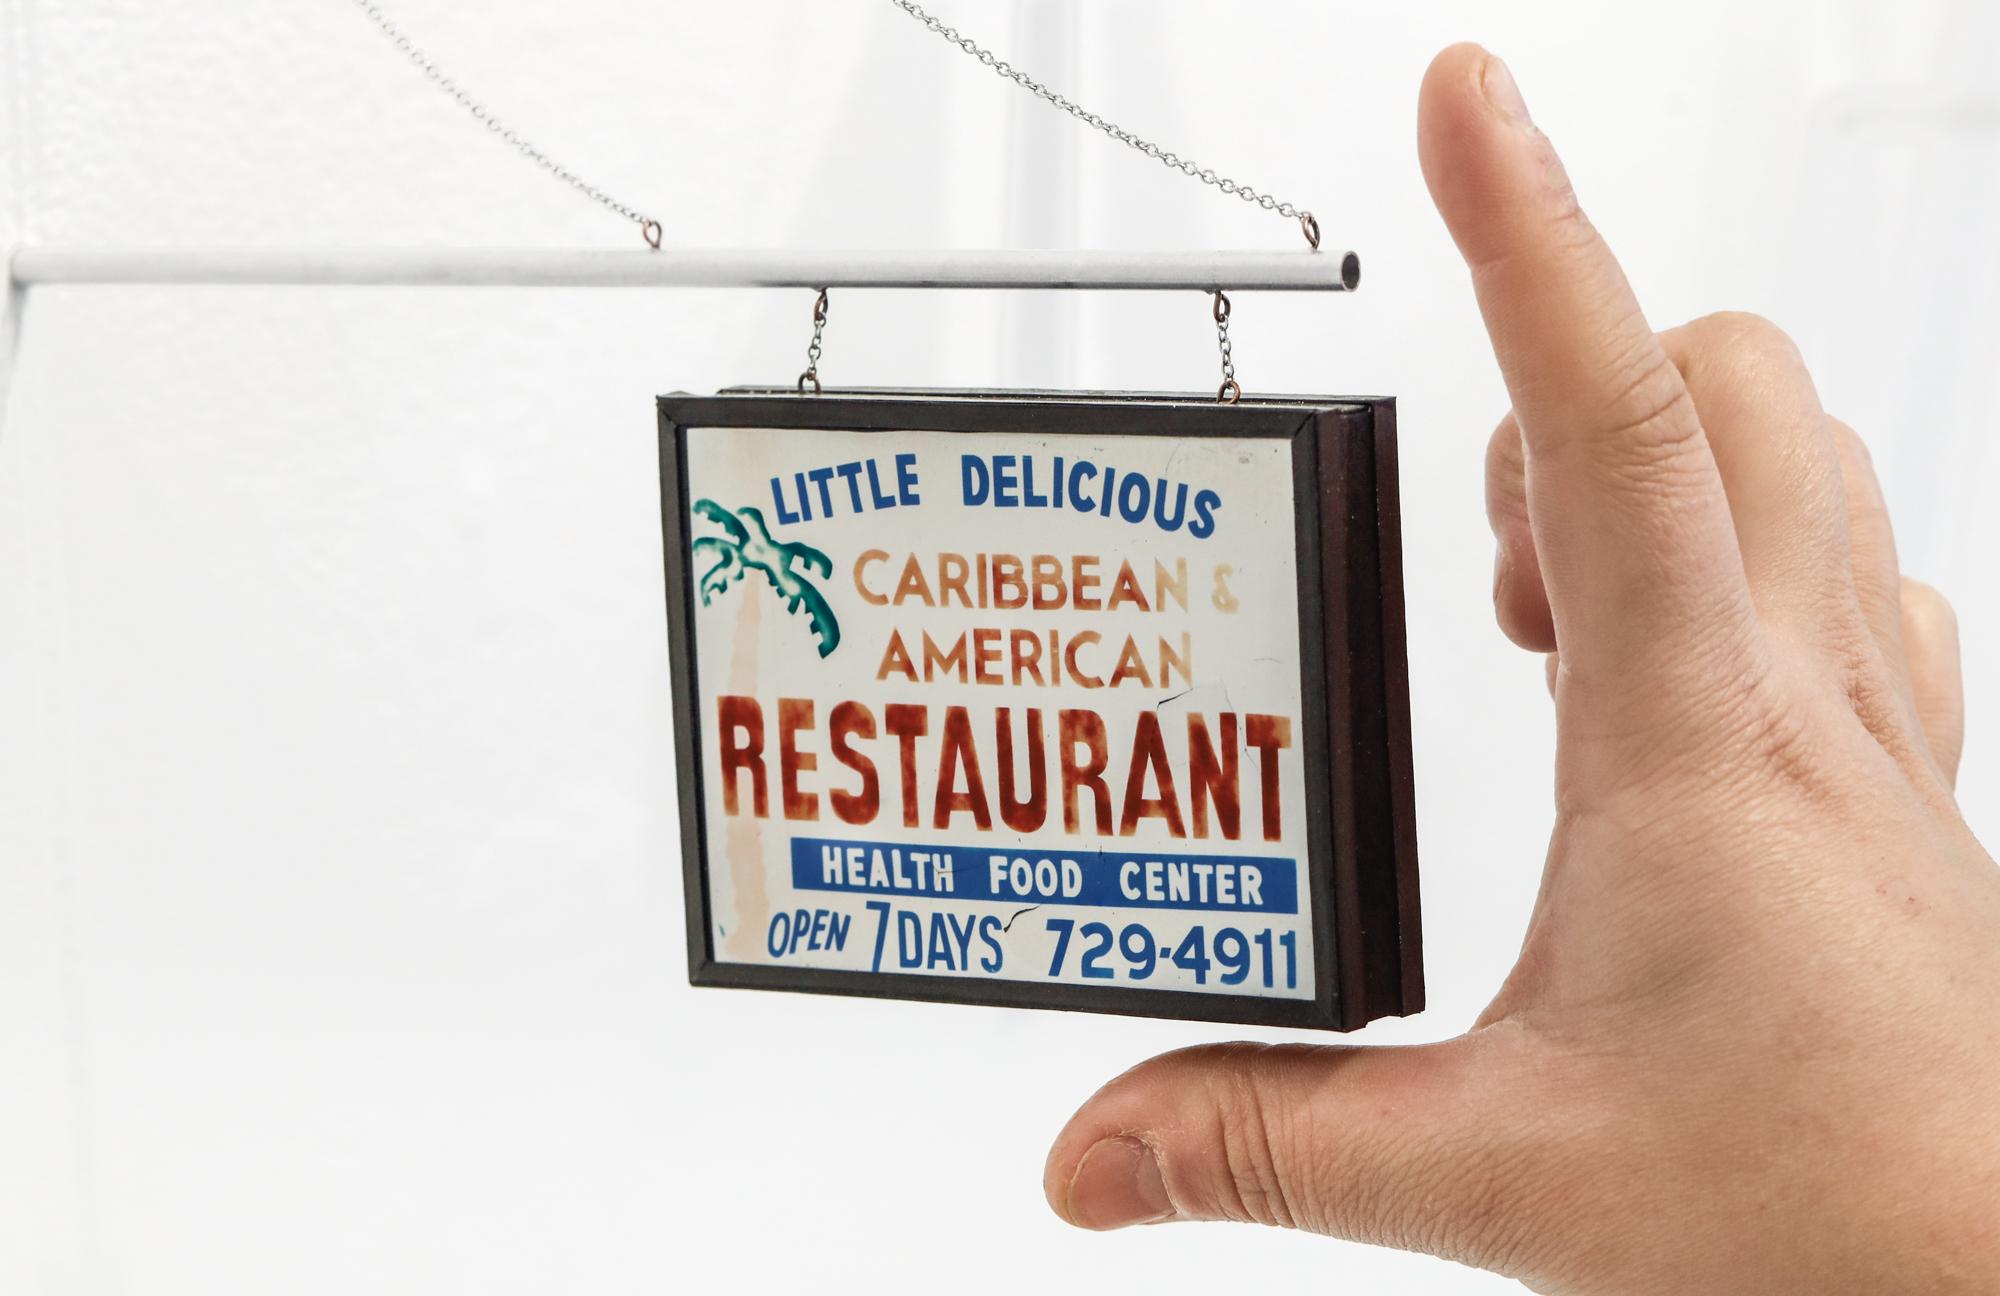 Little Delicious Caribbean and American Restaurant 5